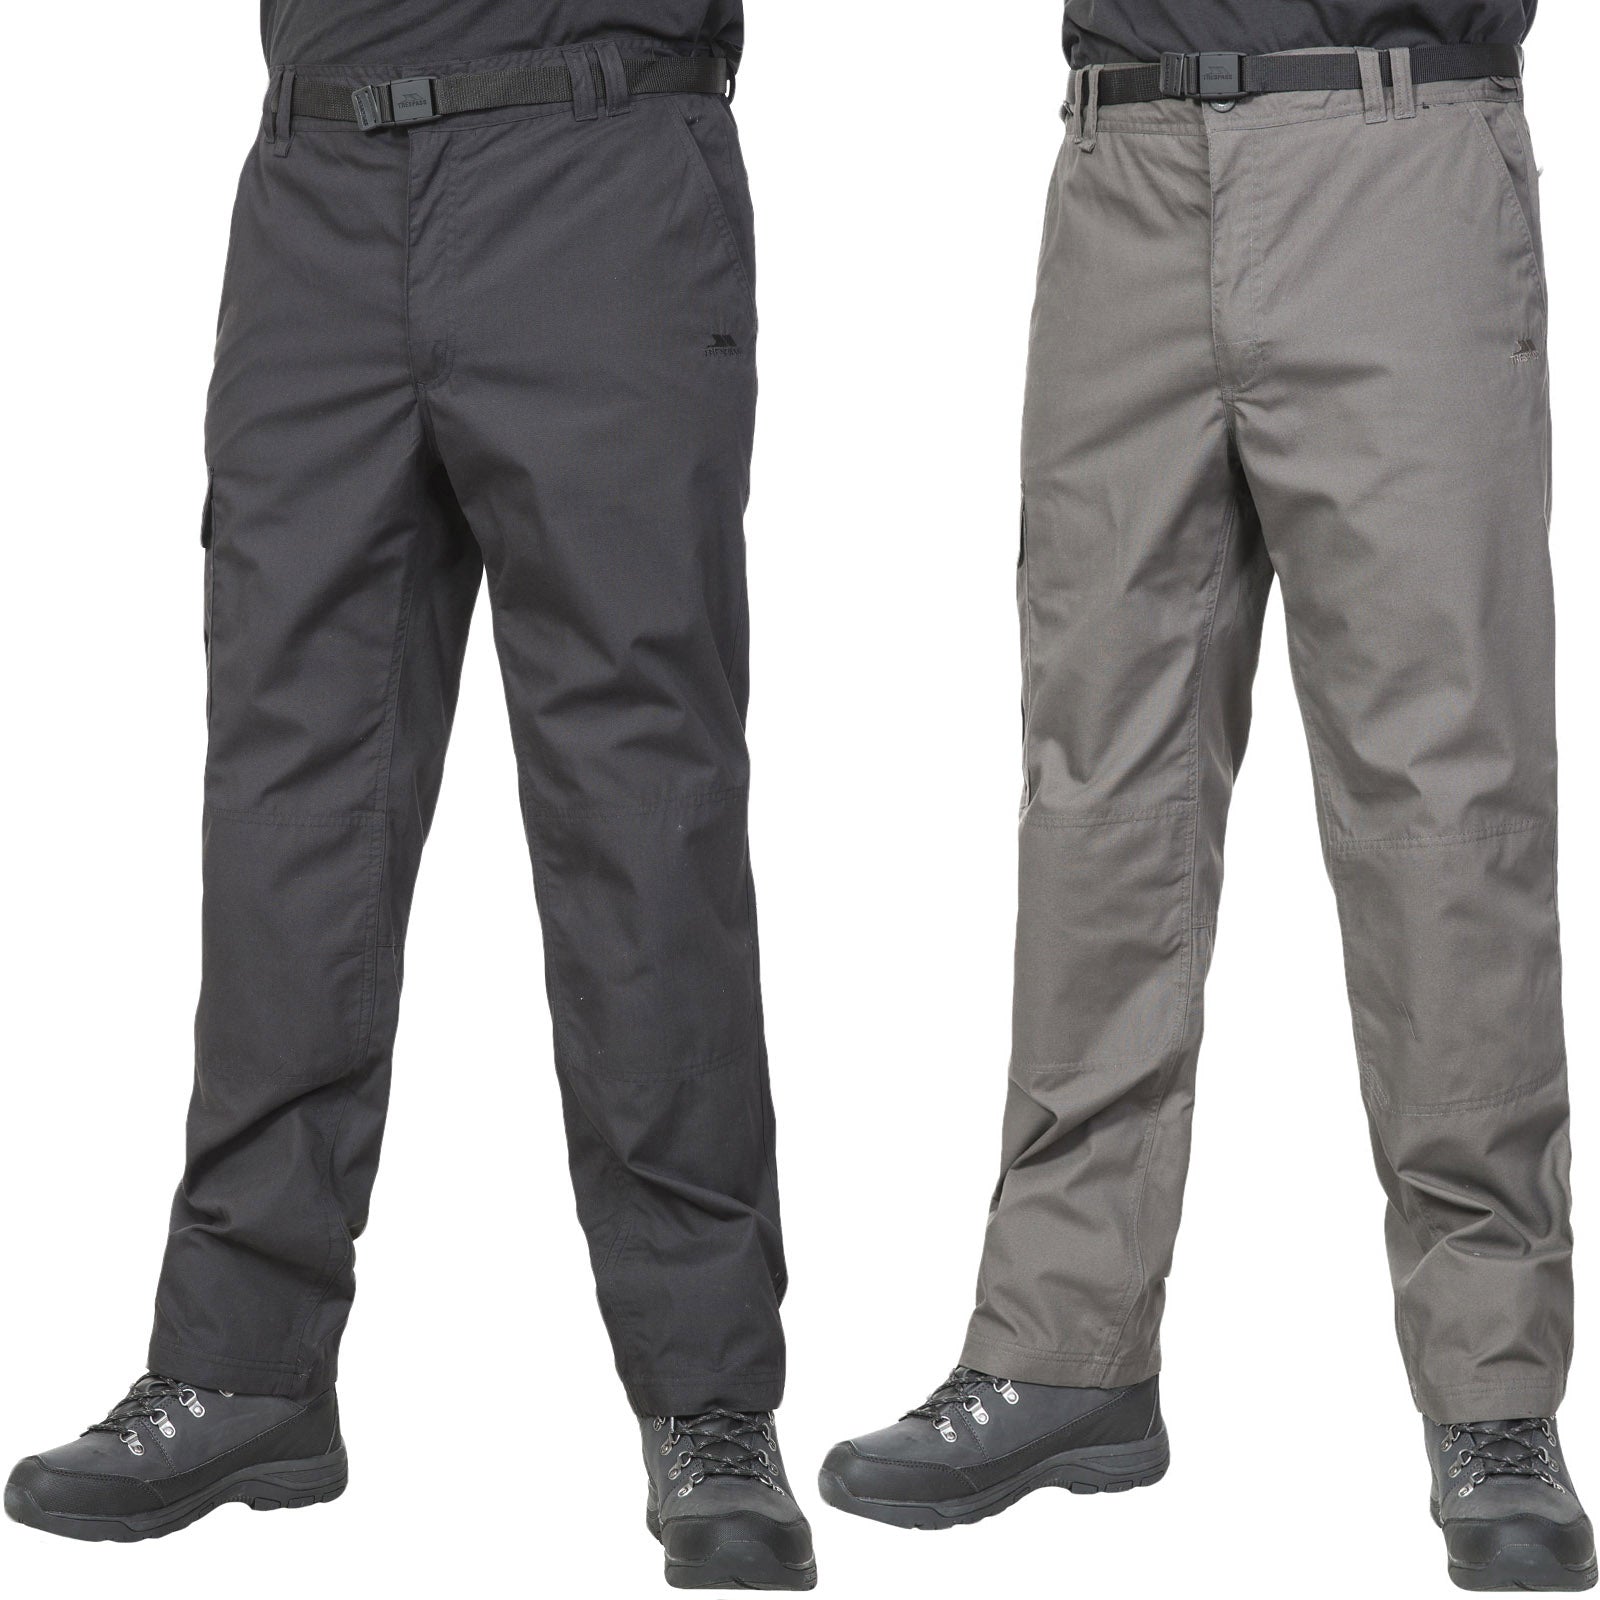 Trespass Mens Holloway DLX Walking Trousers | Outdoor Look